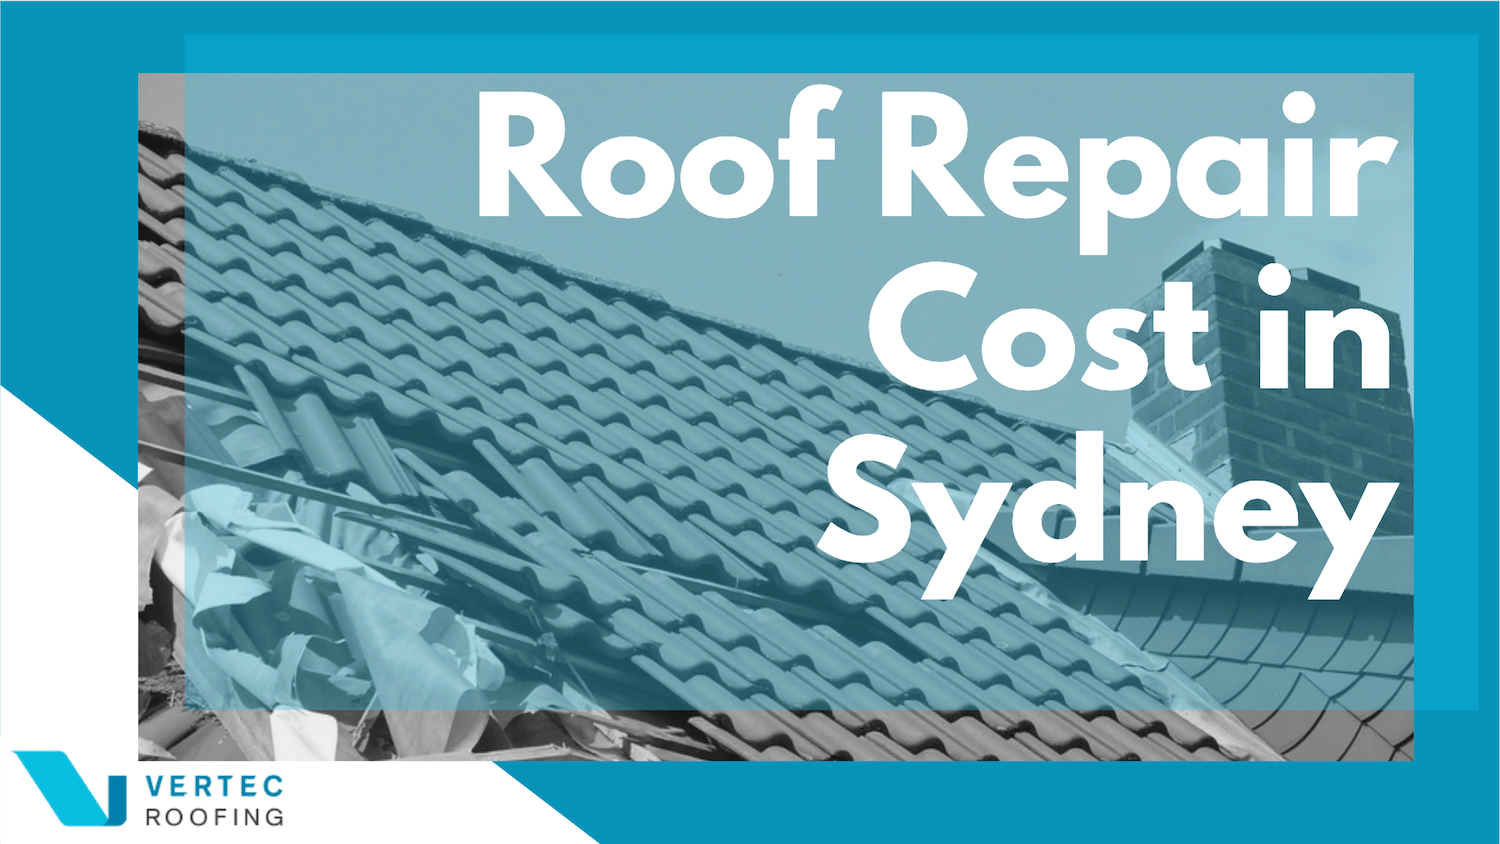 Roof Repair Cost Sydney – What You Can Expect to Pay